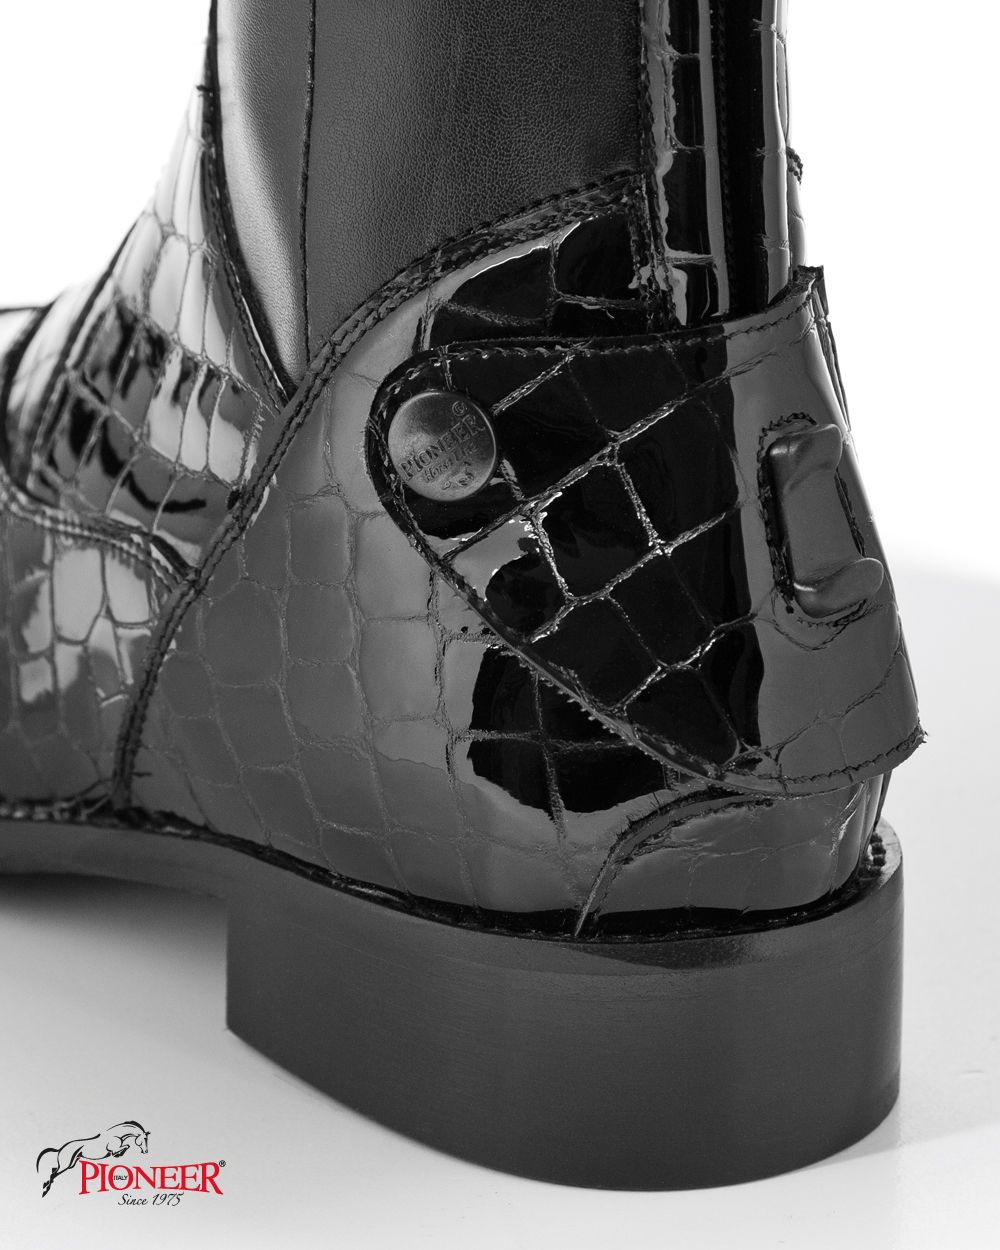 Tall Riding boots with croc detailing